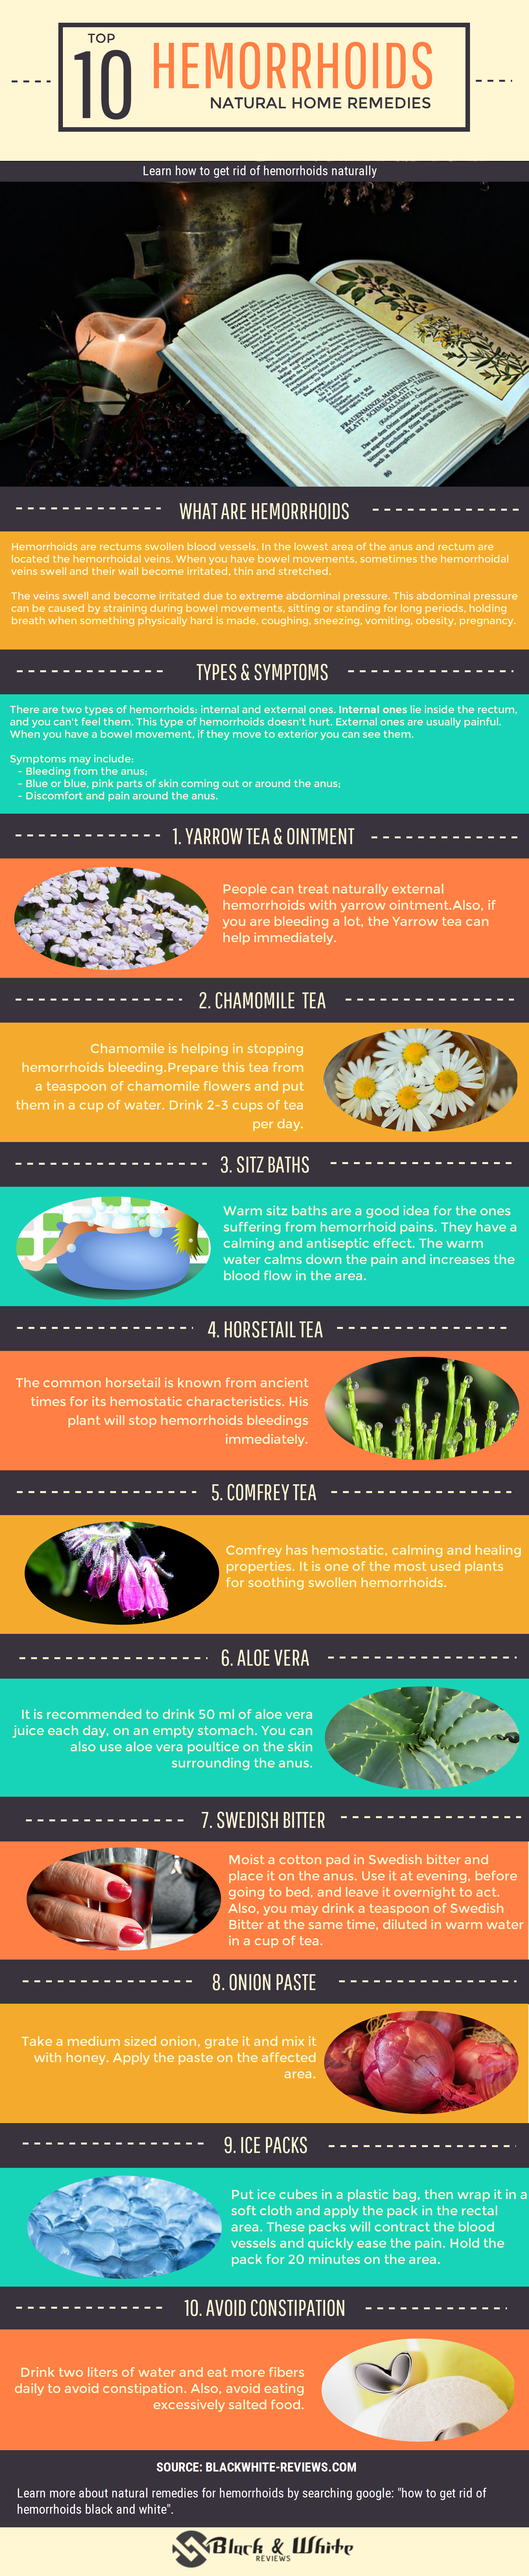 top 10 home remedies for hemorrhoids - infographic